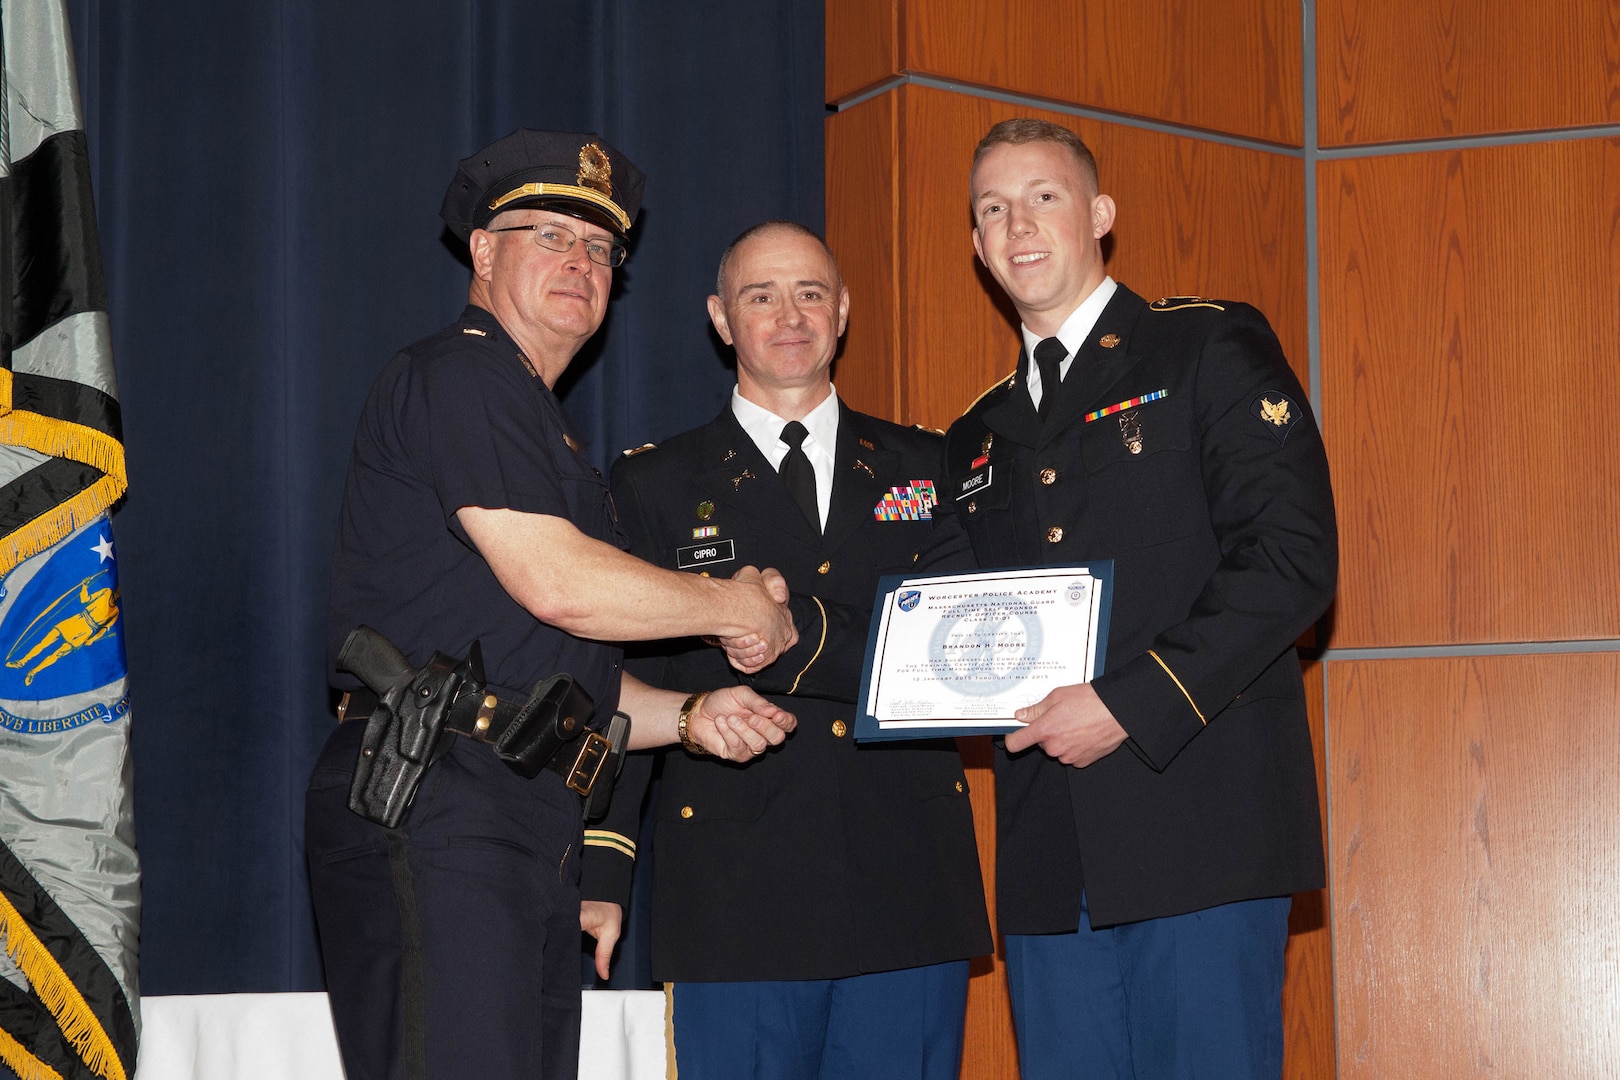 Army Maj. Richard Cipro, deputy provost marshal, Massachusetts National Guard and Worcester Police Sergeant, center, with Capt. Jack Ryder, Worcester Police Academy director (and Spc. Brandon Moore, Massachusetts Army National Guard graduate of the police academy. Continuing its long tradition of leadership and innovation, the Massachusetts National Guard in conjunction with the Worcester Police department graduated the nation’s first full-time civilian police academy for Army Military Police and Air Force Security Forces with a ceremony, here, May 1, 2015.